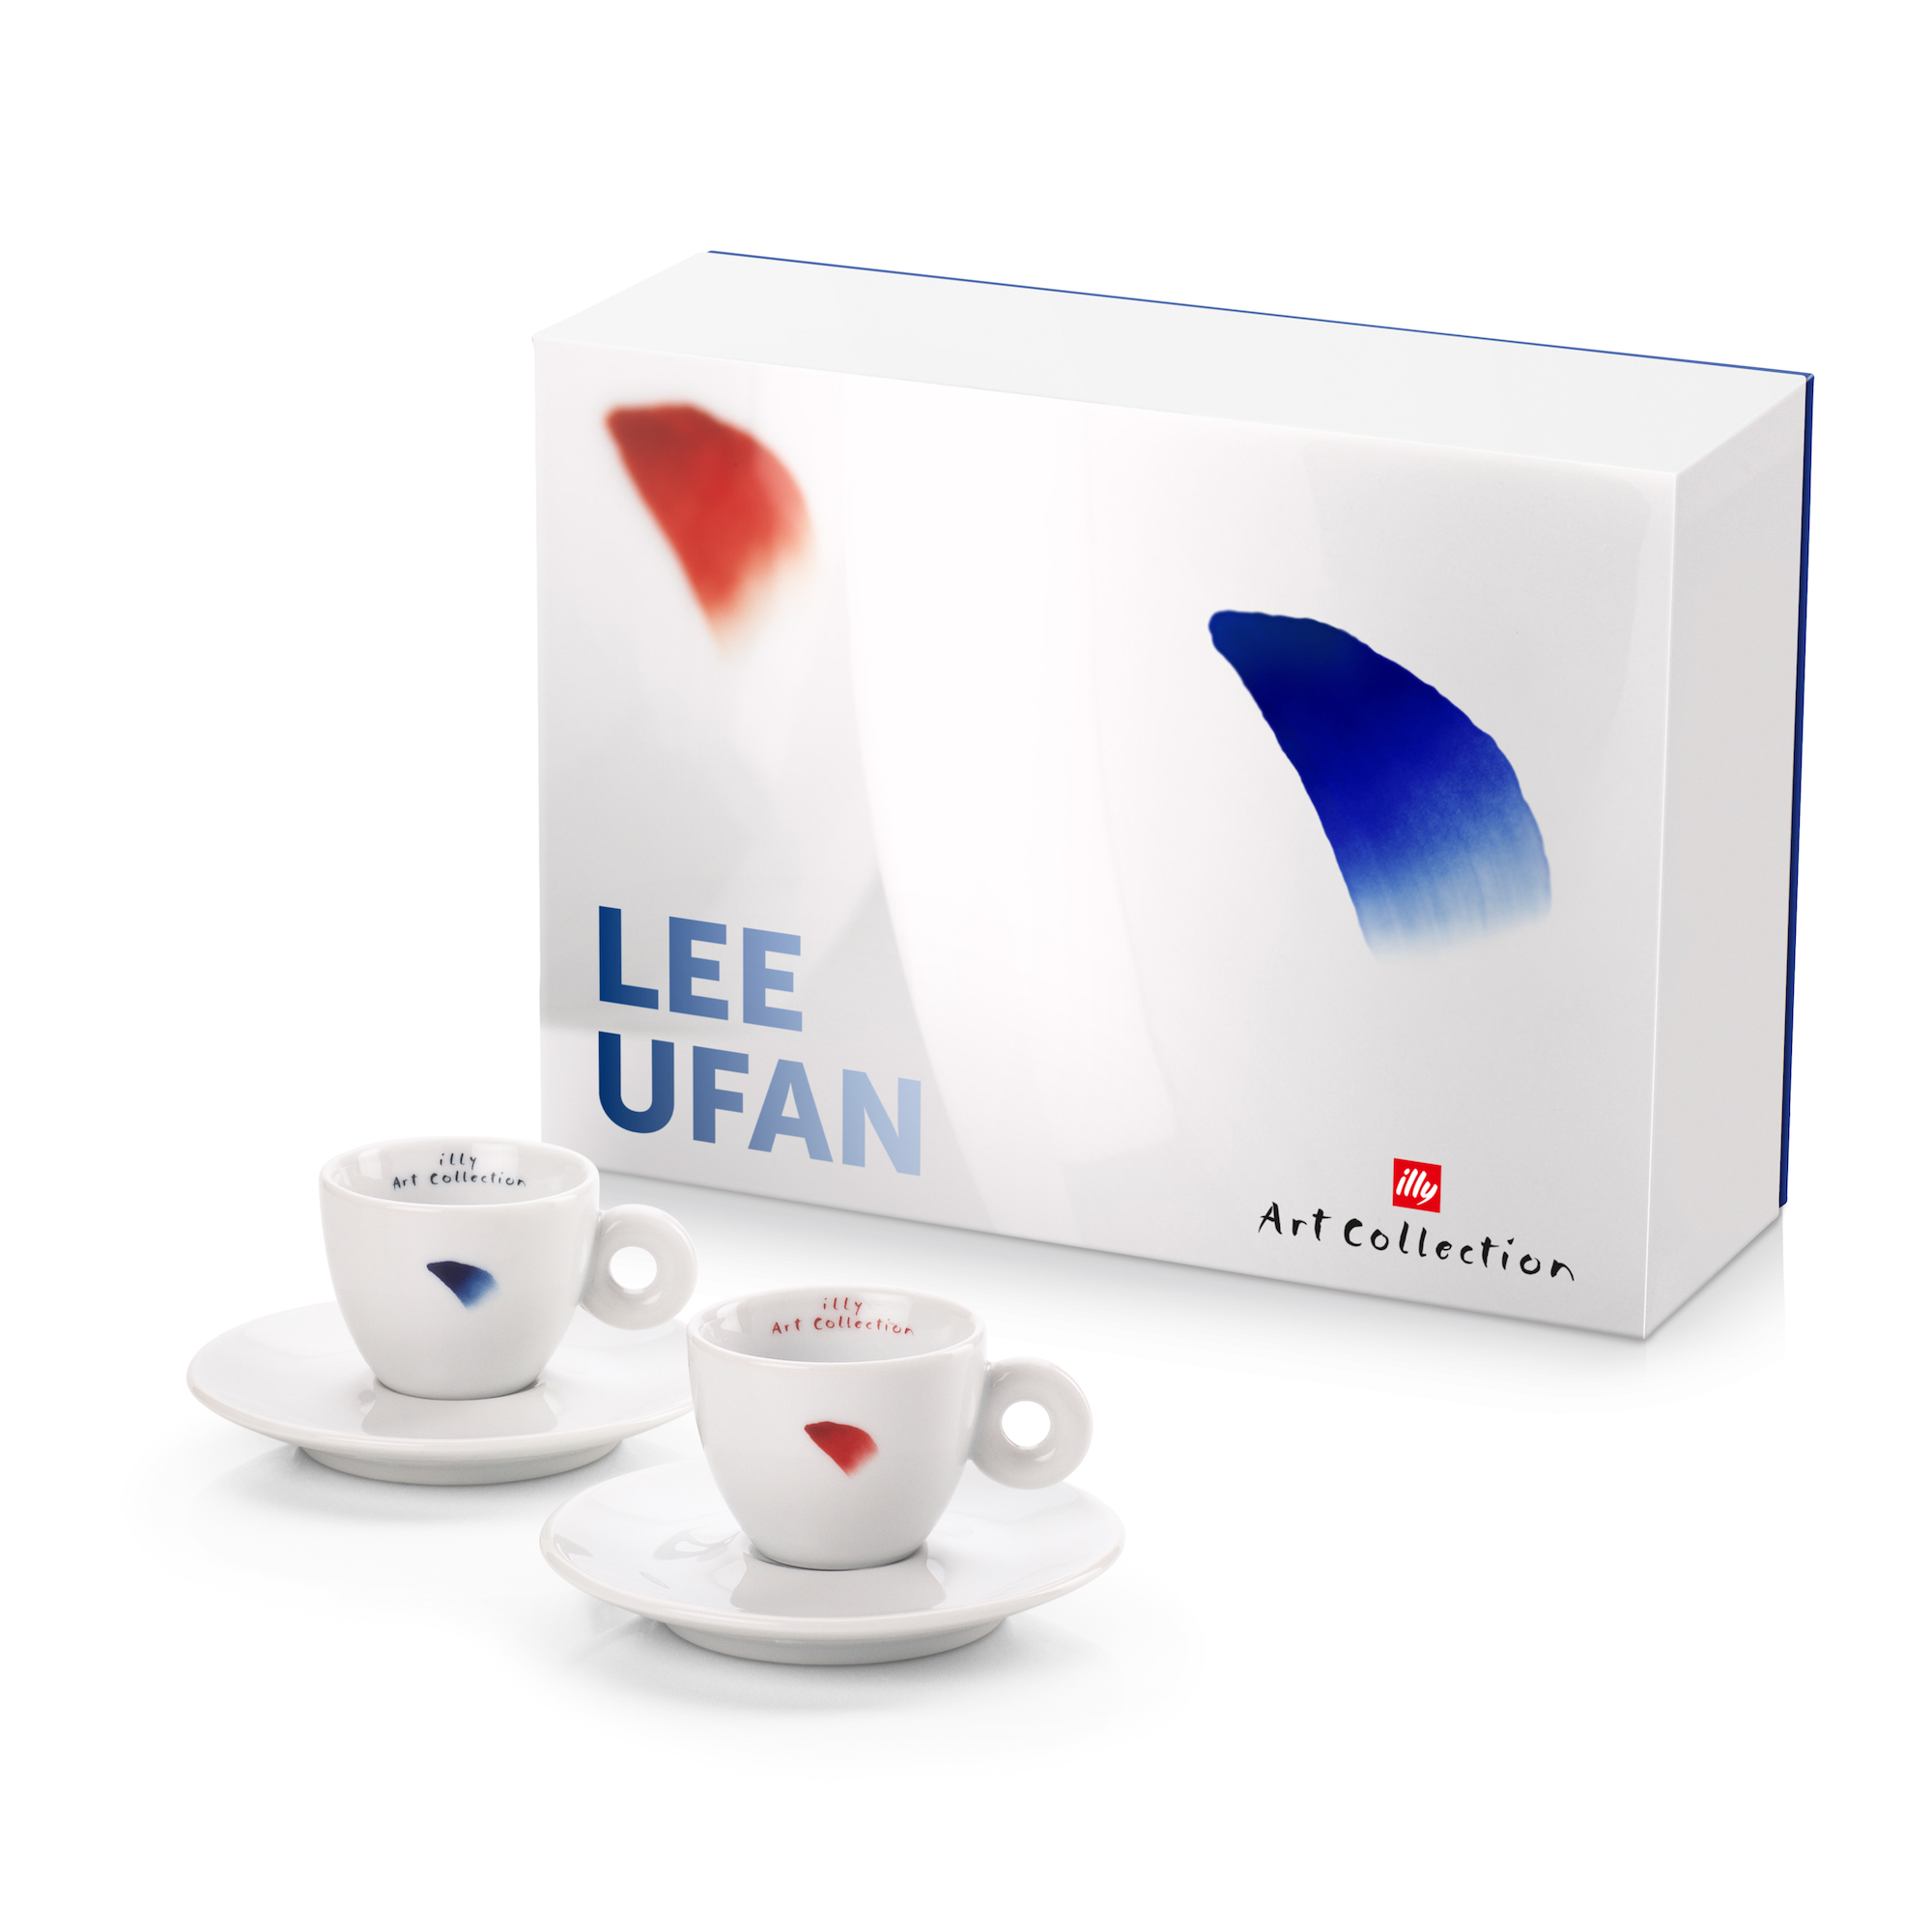 Lee Ufan's illy Art Collection